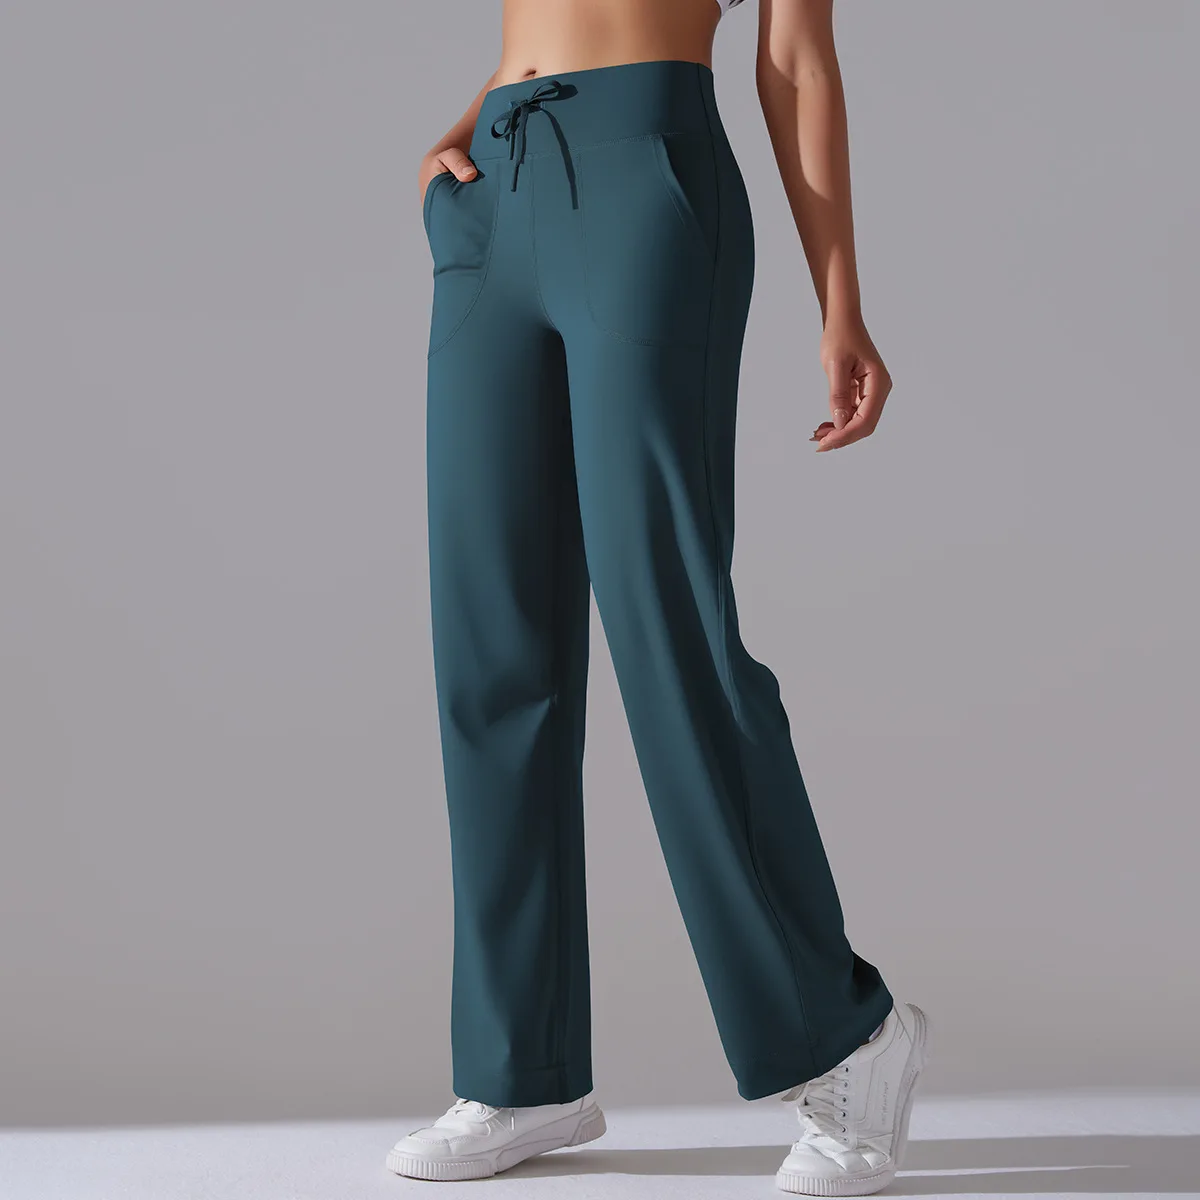 

Yoga Straight Leg Sweatpant Straight Leg Women's Loose Tracksuit Pants Wide Leg Outdoor Gym Runing Casual Tracksuit Pants